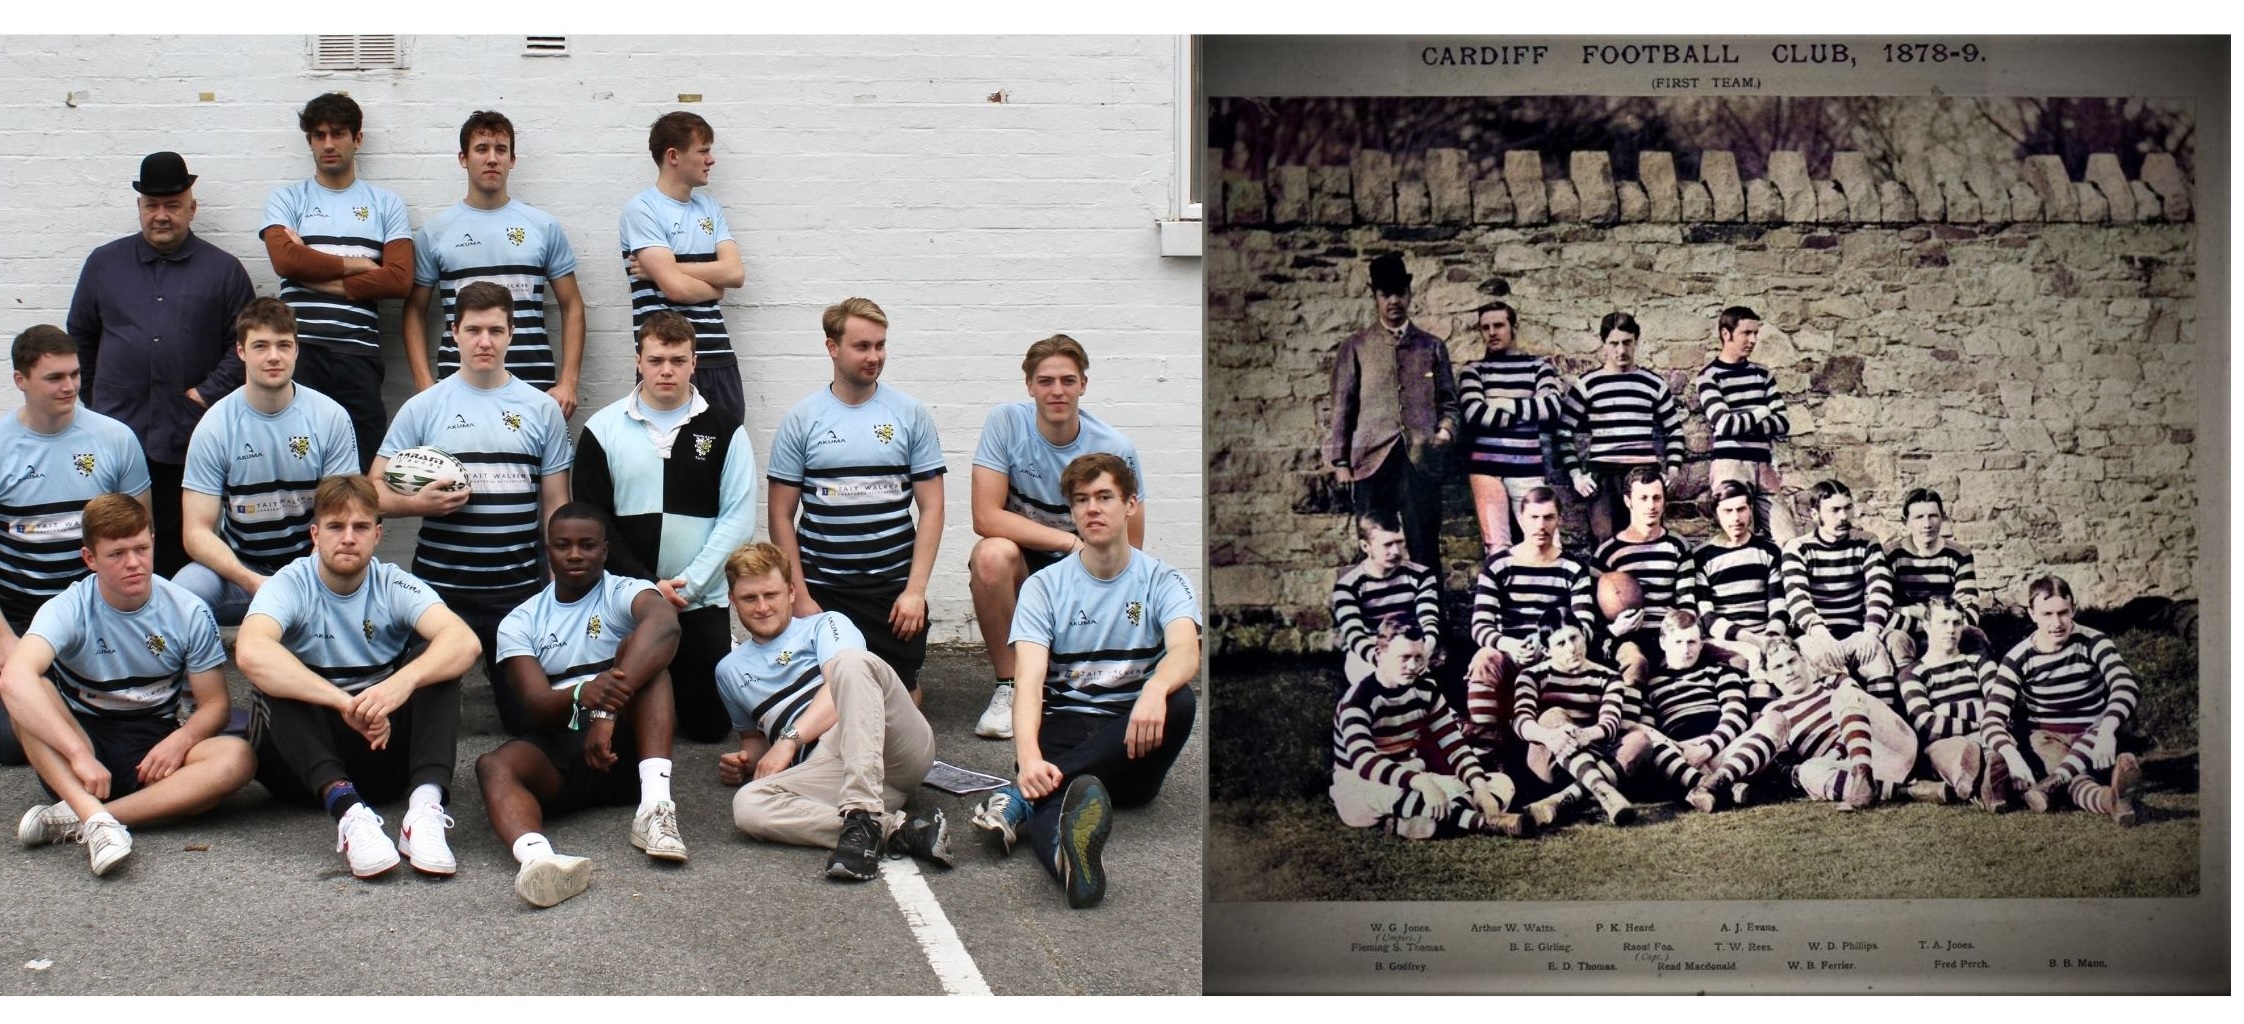 Two photos showing two rugby teams